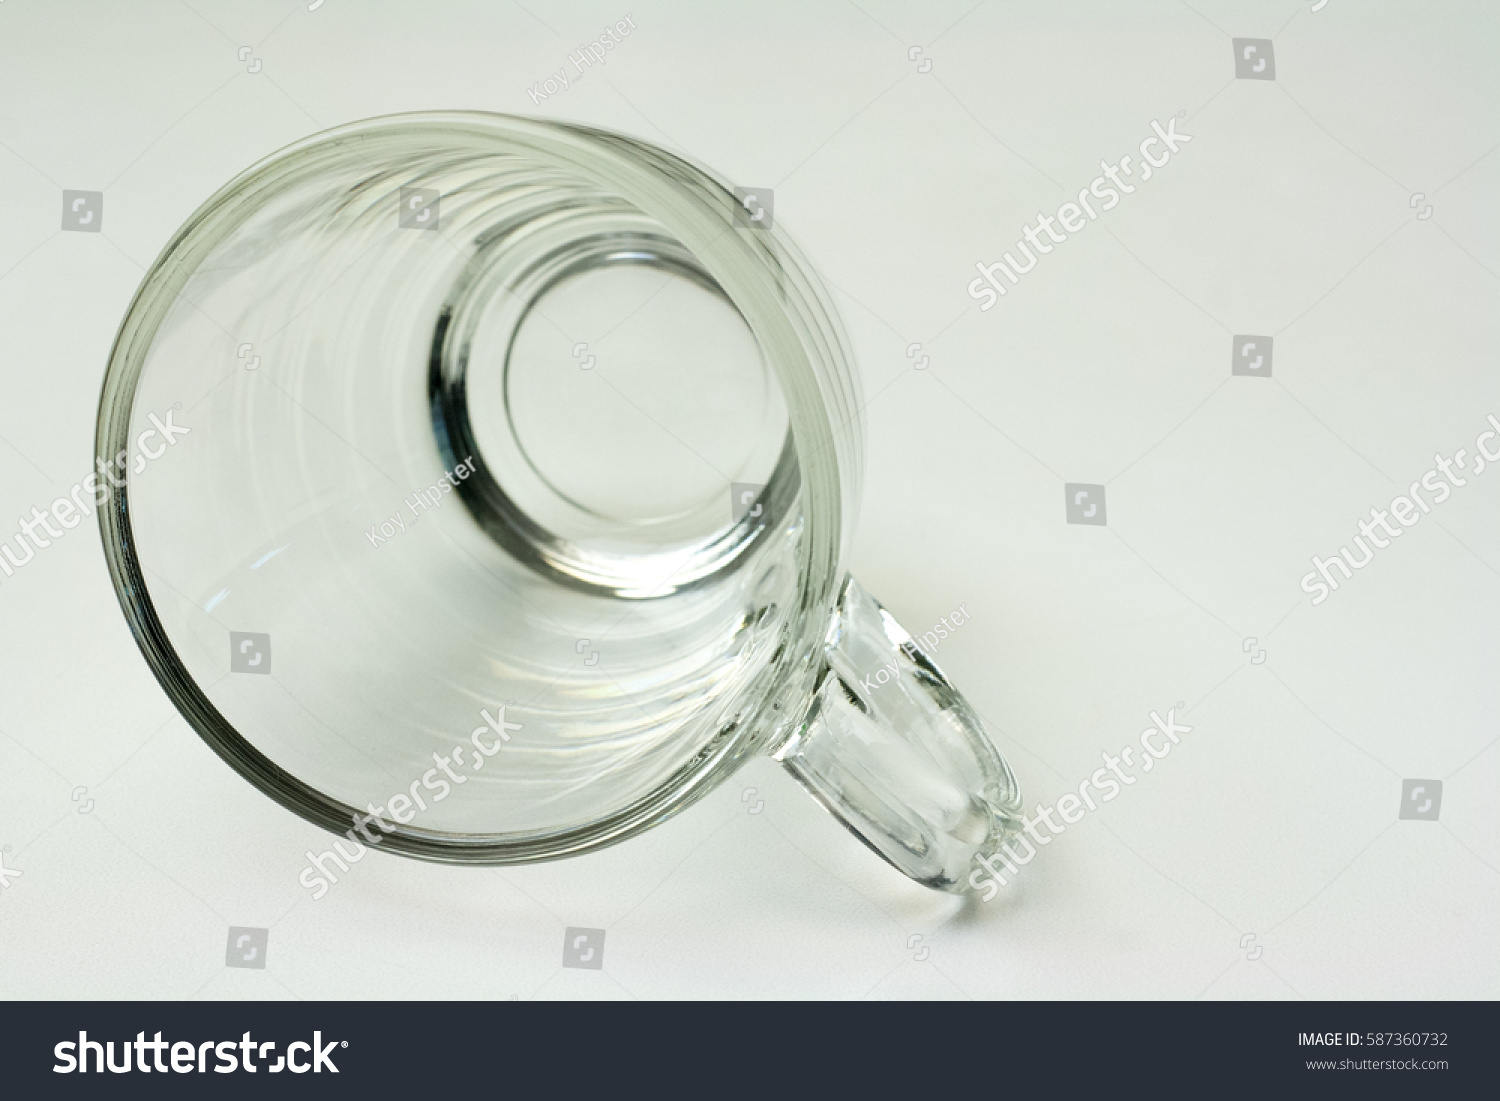 Empty glass on a white background. #587360732